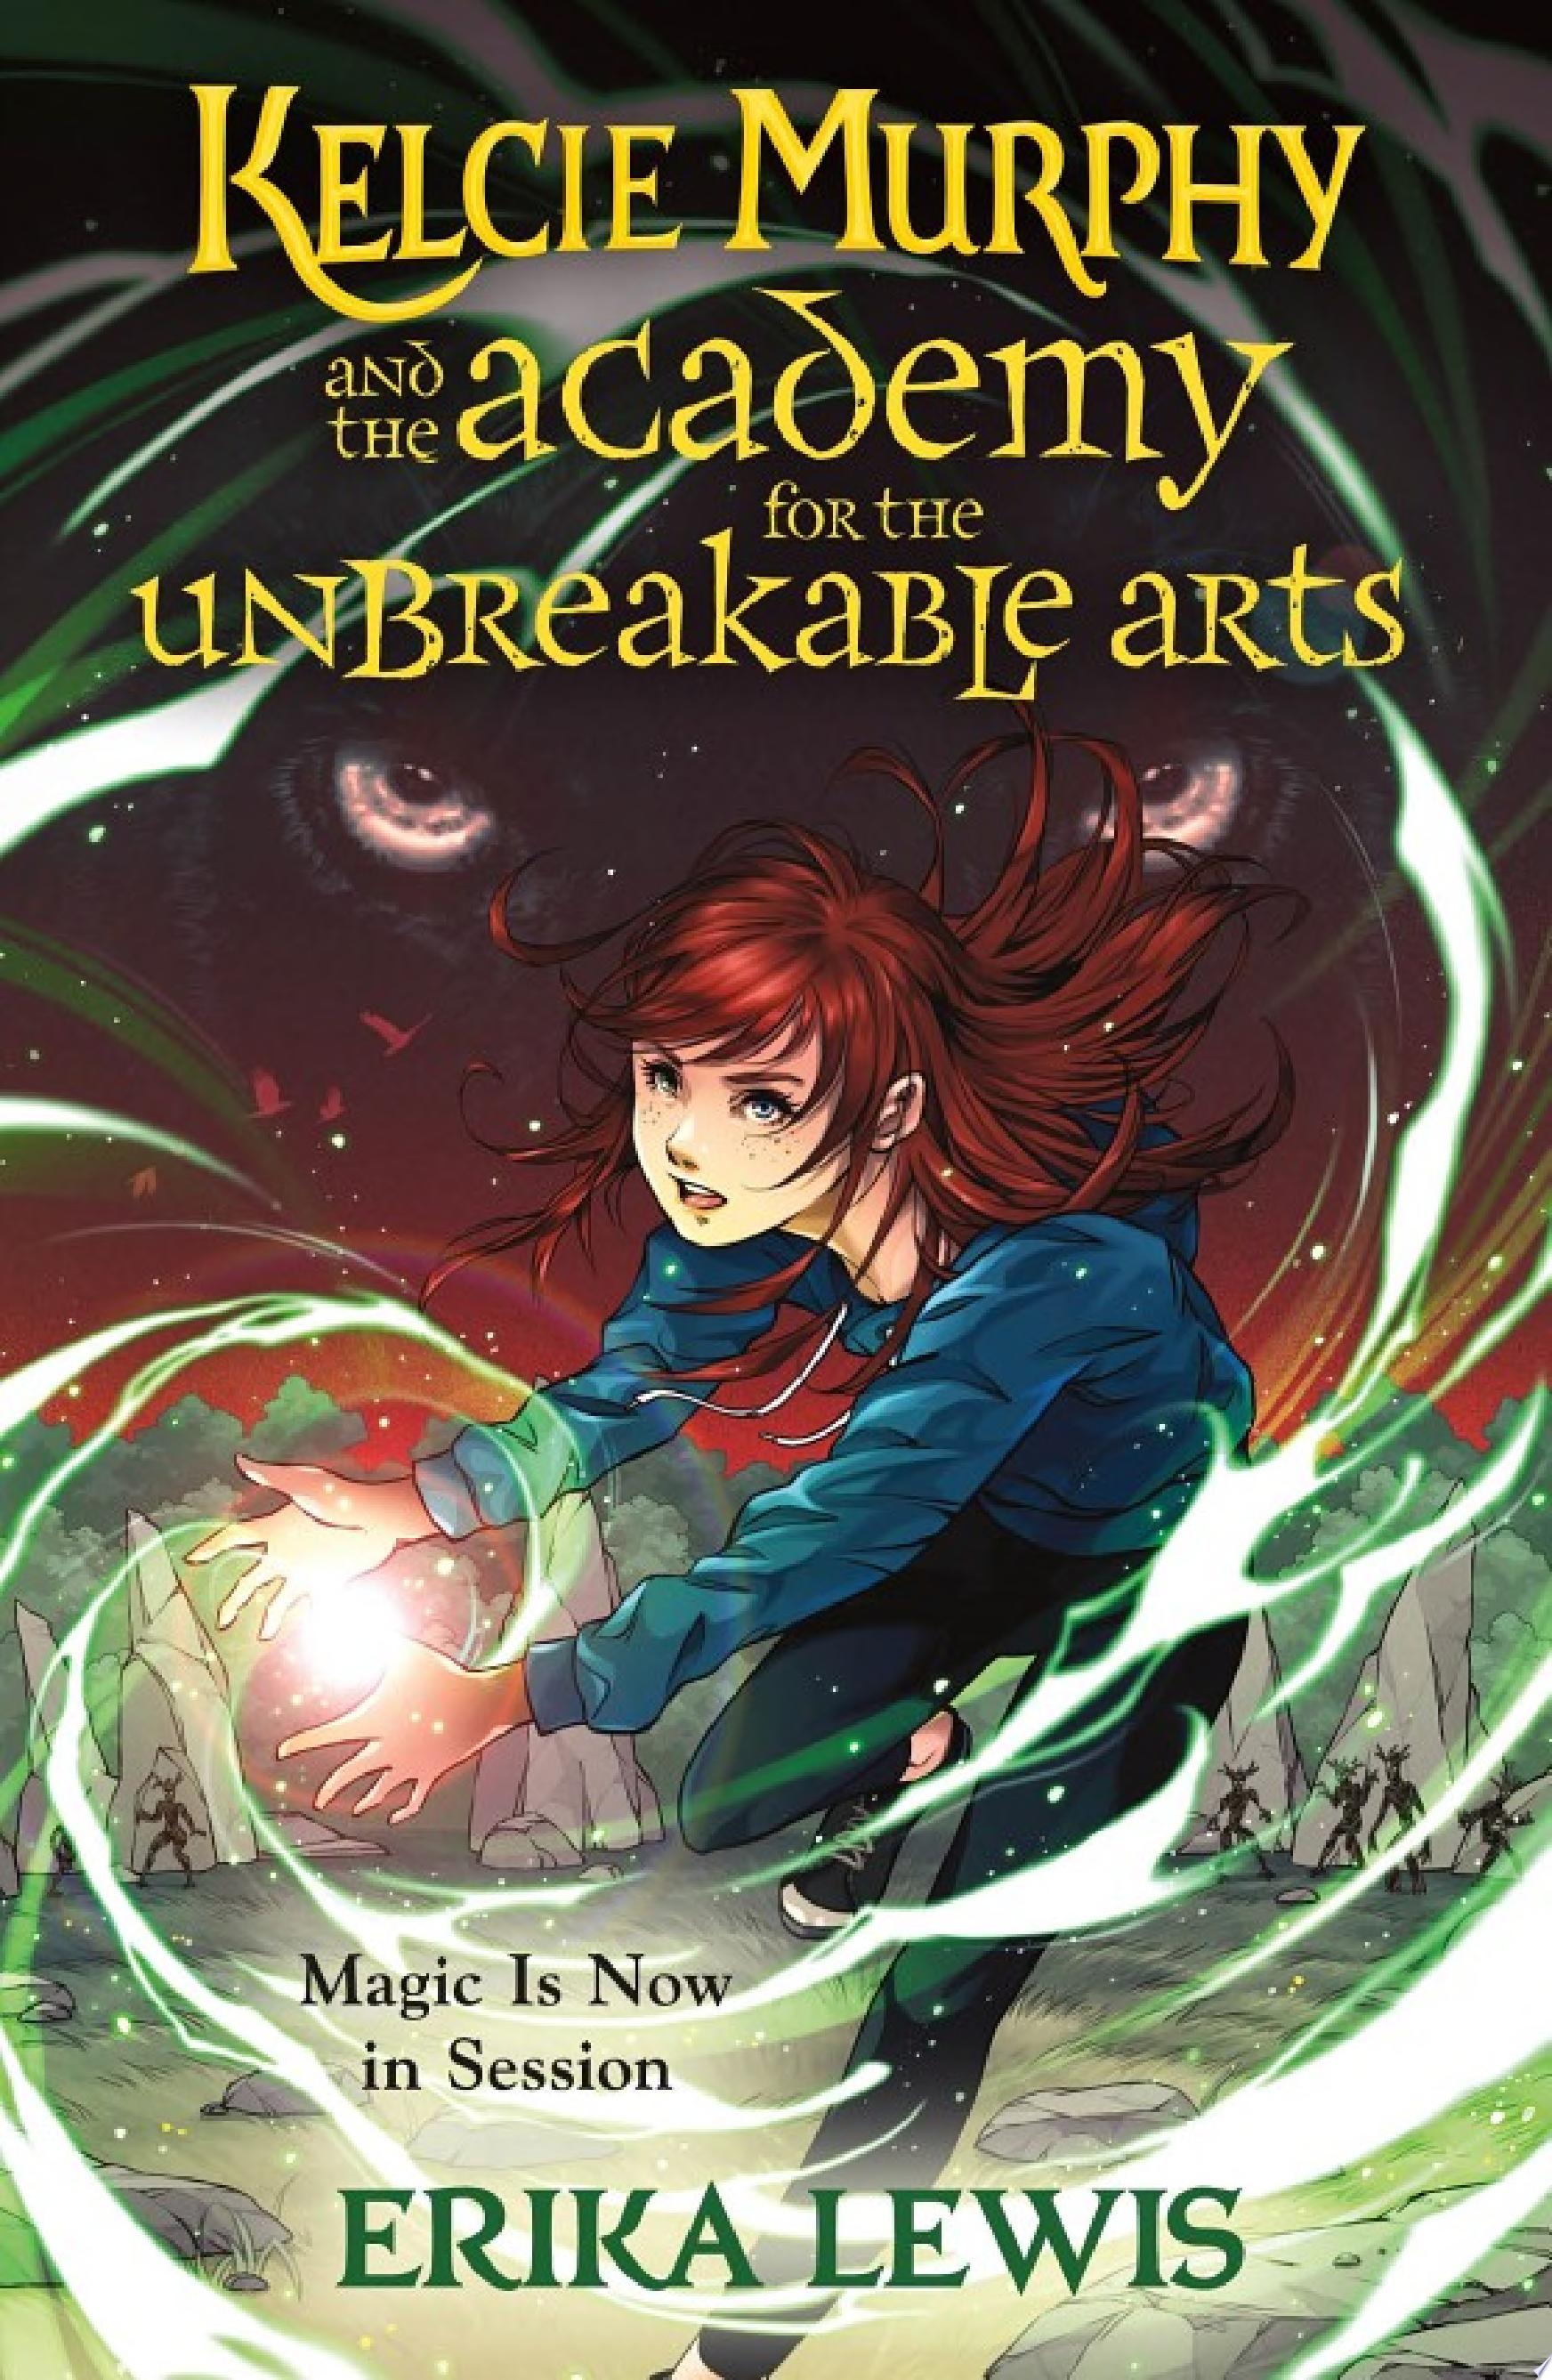 Image for "Kelcie Murphy and the Academy for the Unbreakable Arts"